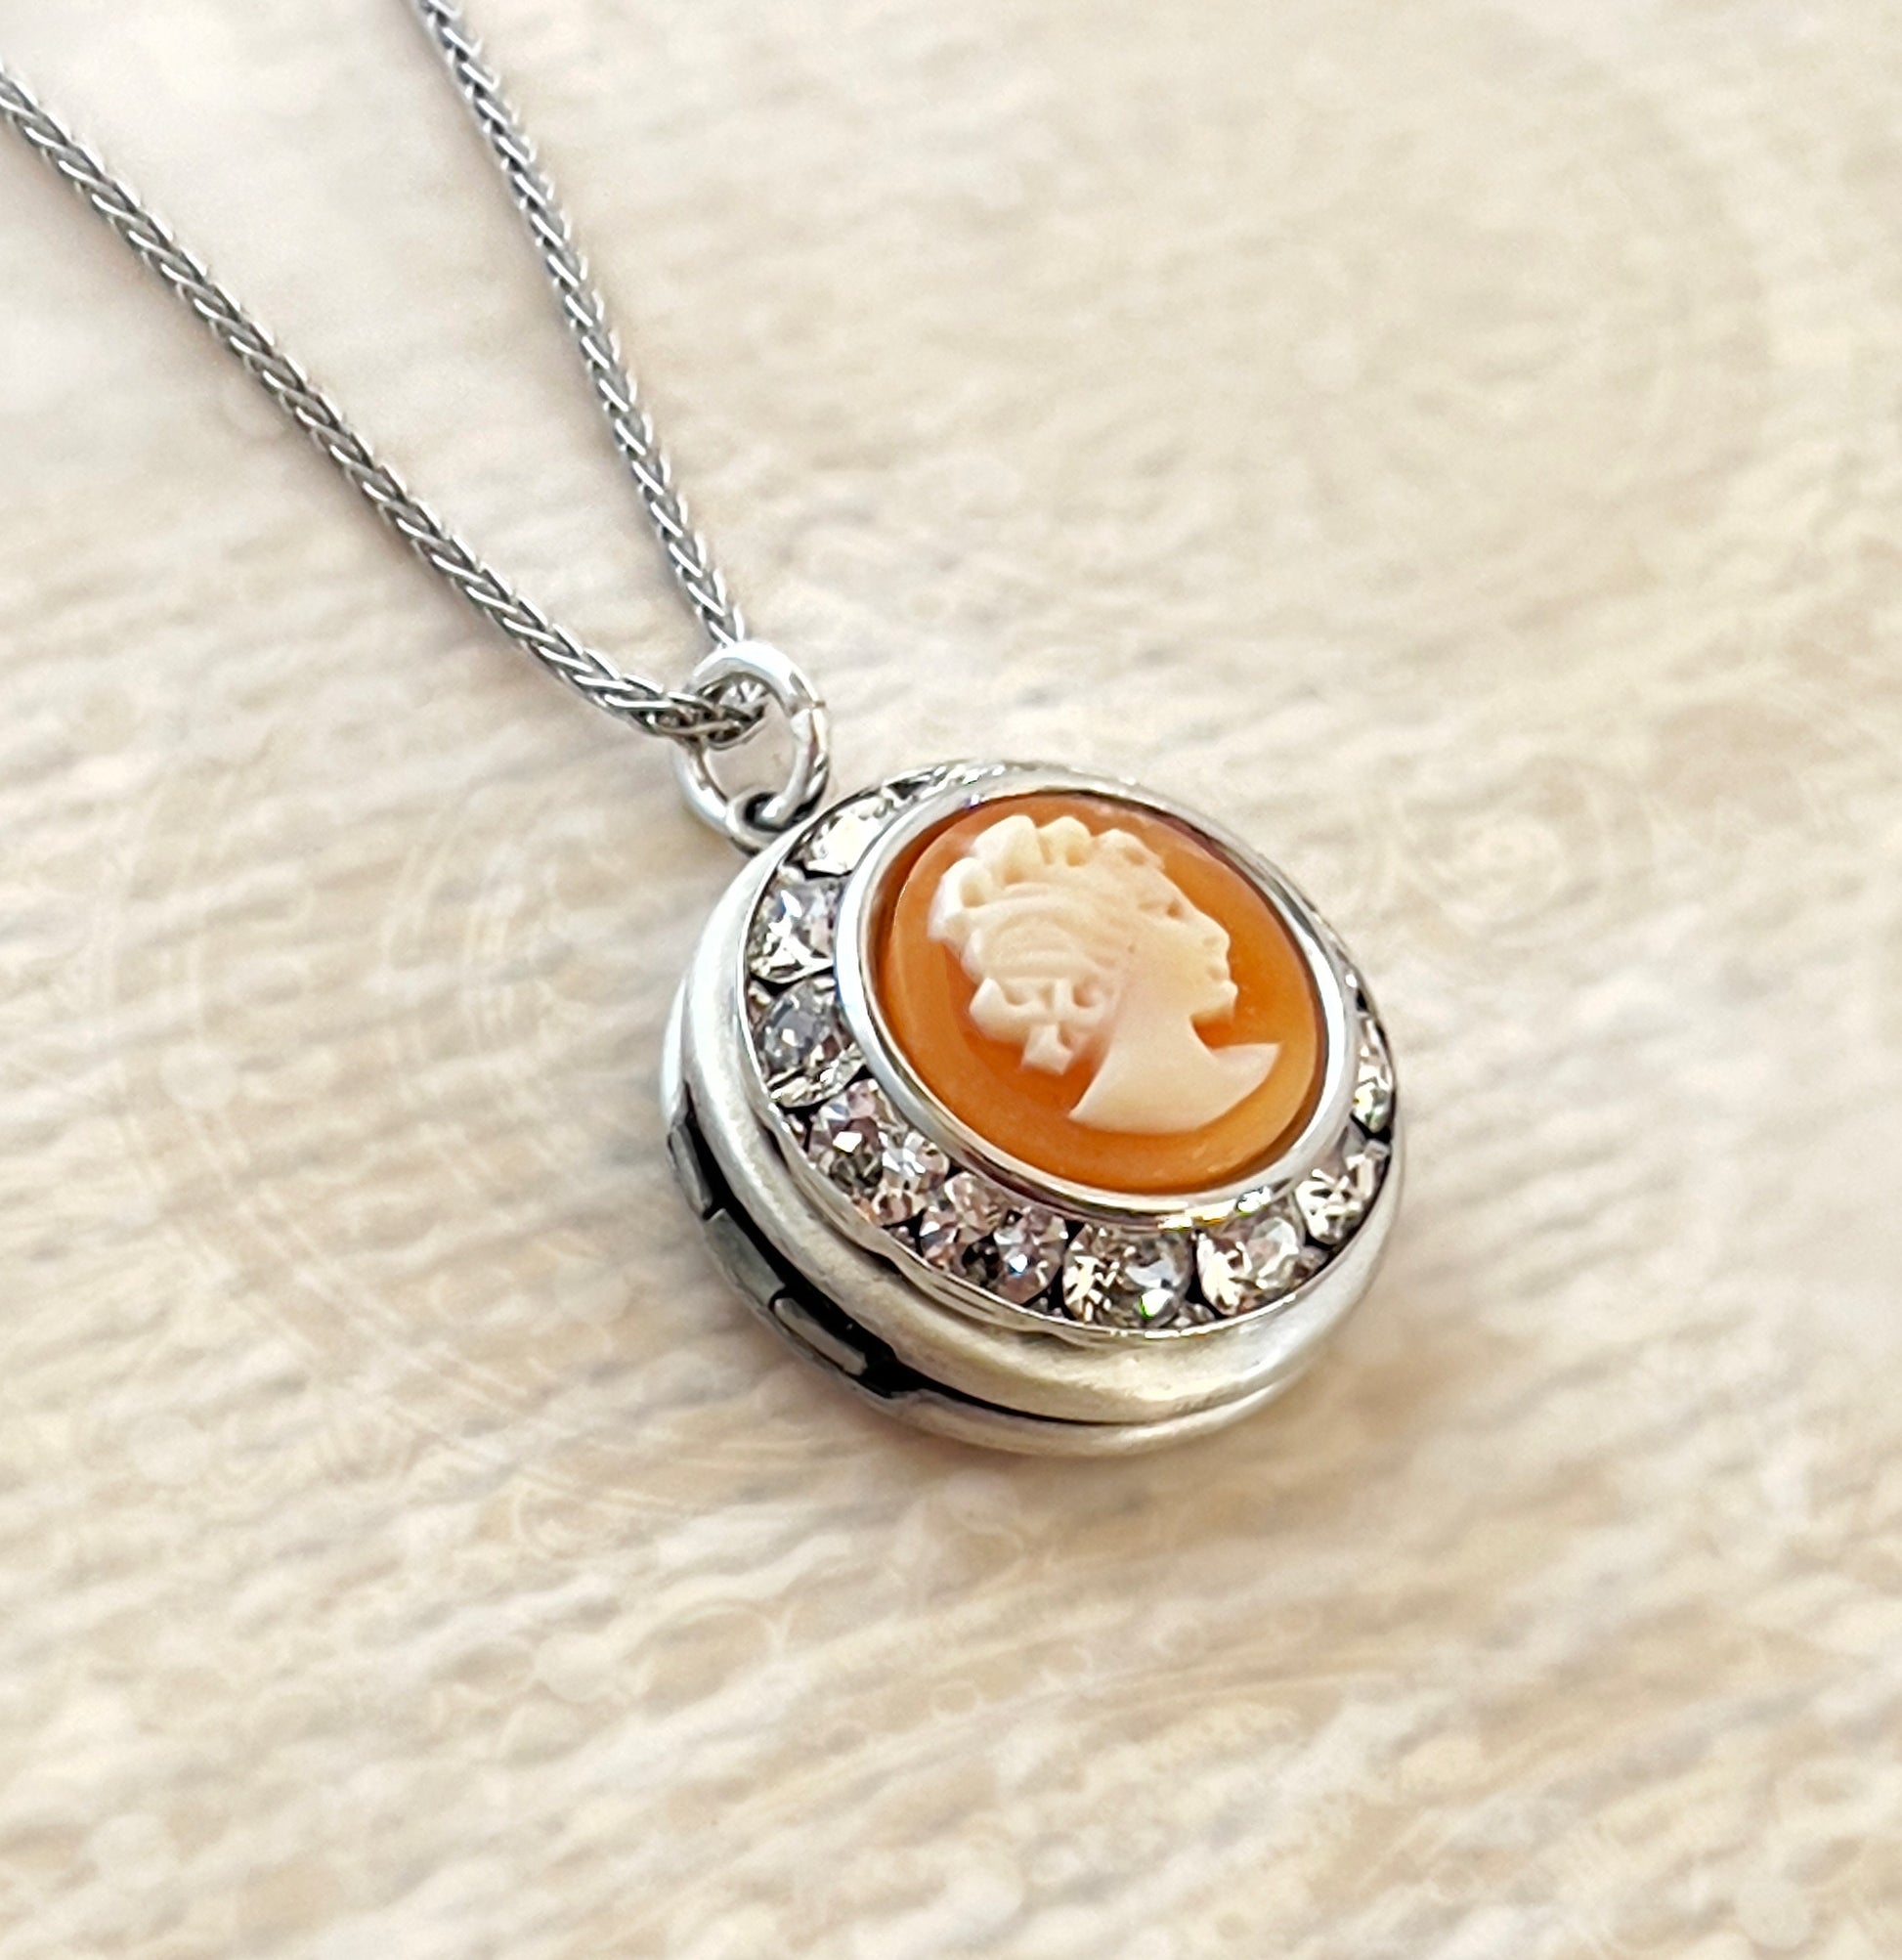 Vintage Shell Cameo Locket Necklace, Victorian Photo Locket, Girlfriend Gift, Anniversary Gifts for Her